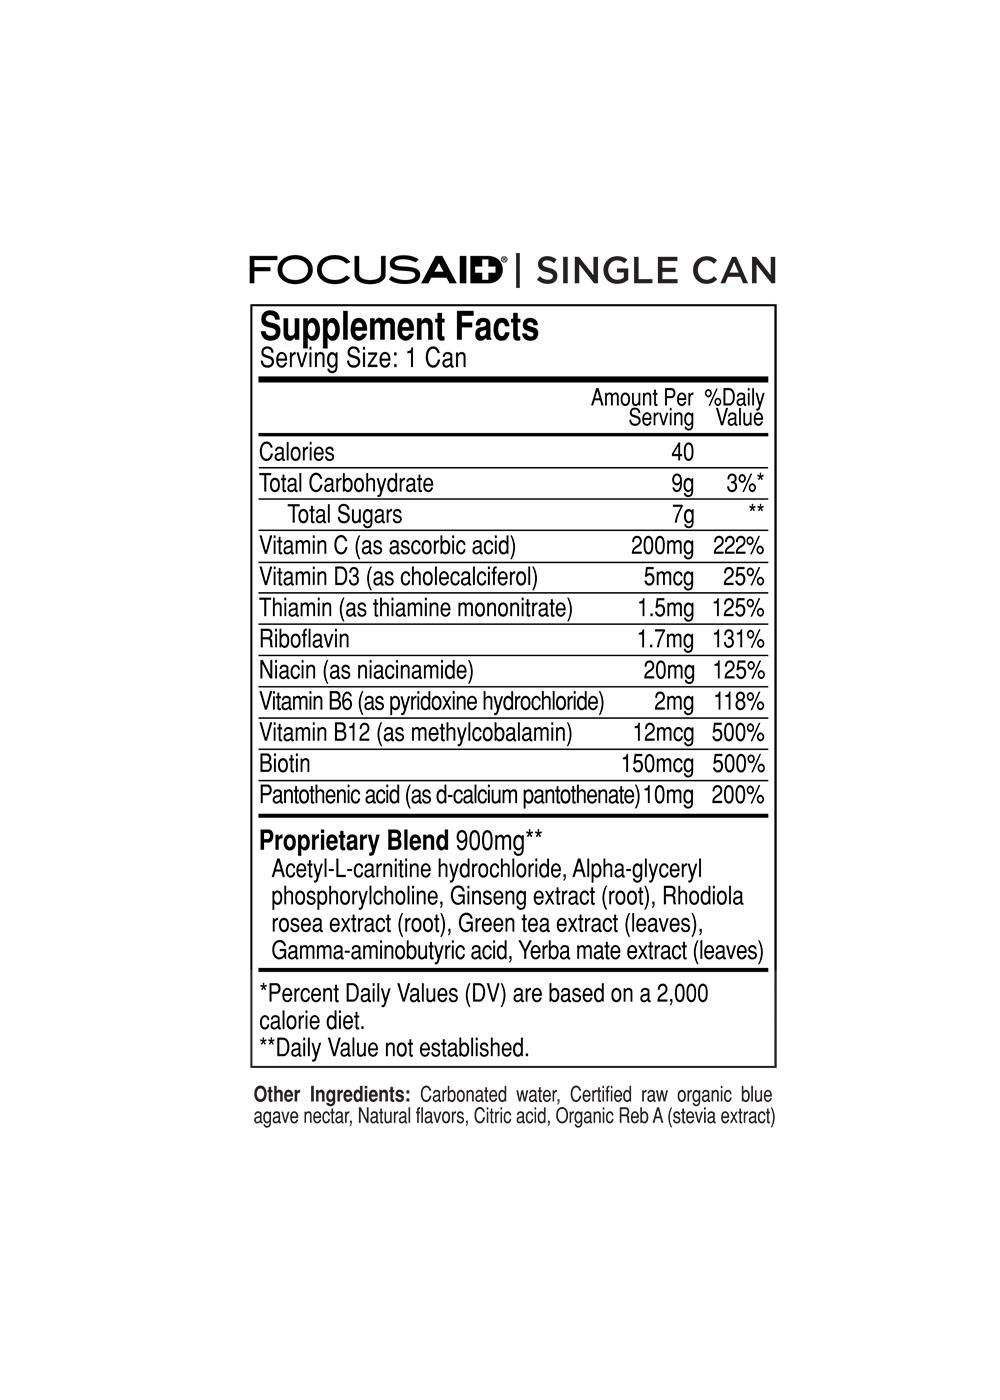 LIFEAID FOCUSAID Energy Blend Dietary Supplement Beverage; image 2 of 2